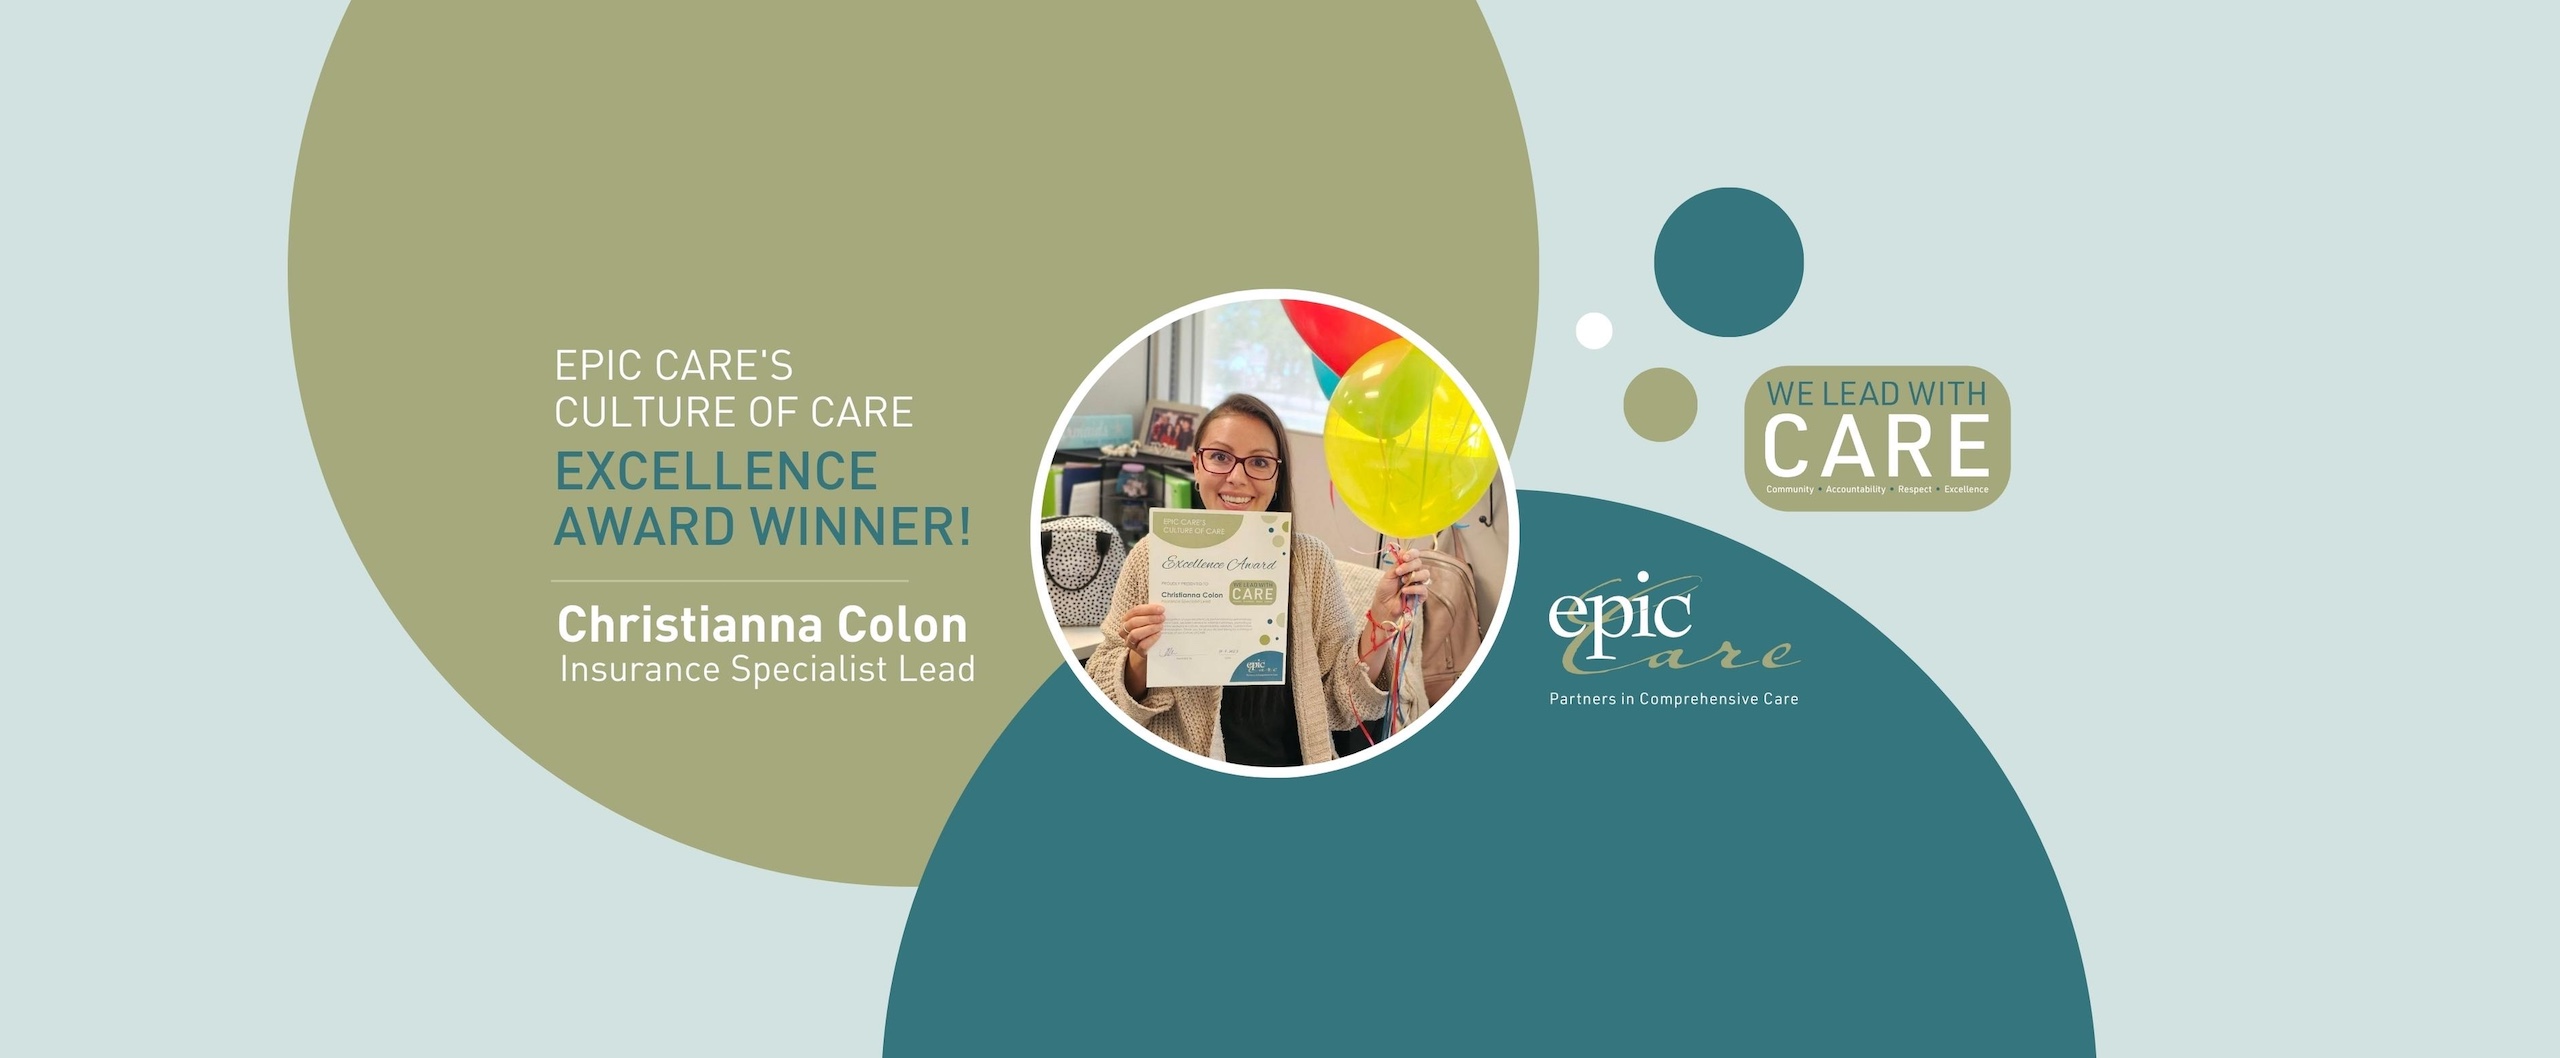 Epic Care’s Culture of CARE Excellence Award Winner! – Christianna Colon